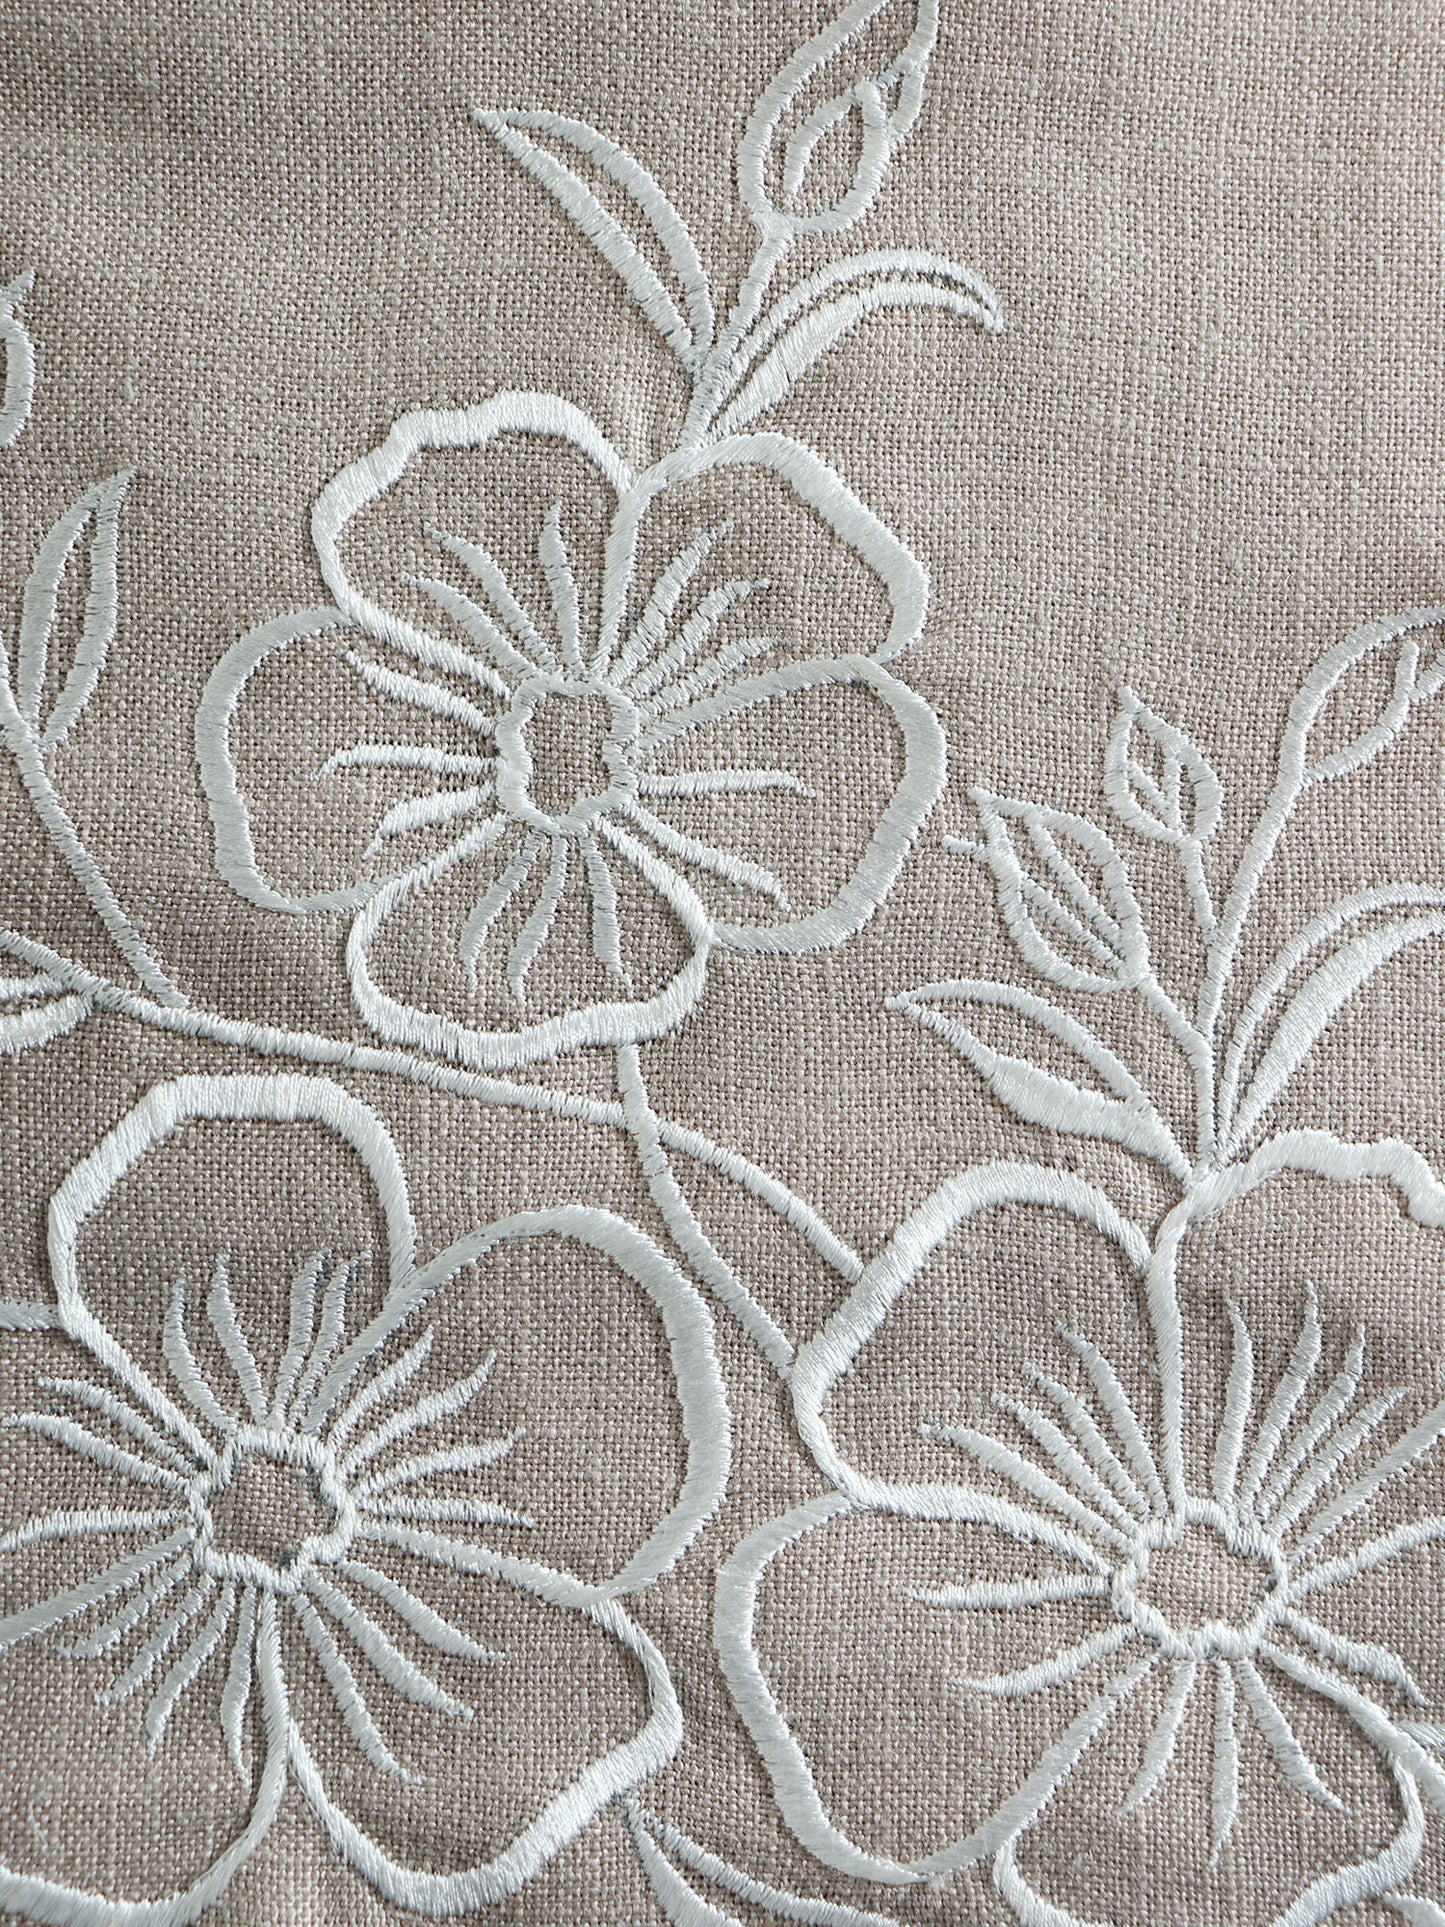 floral embroidery on beige table runner for 6 seater dining table - 12x84 inch